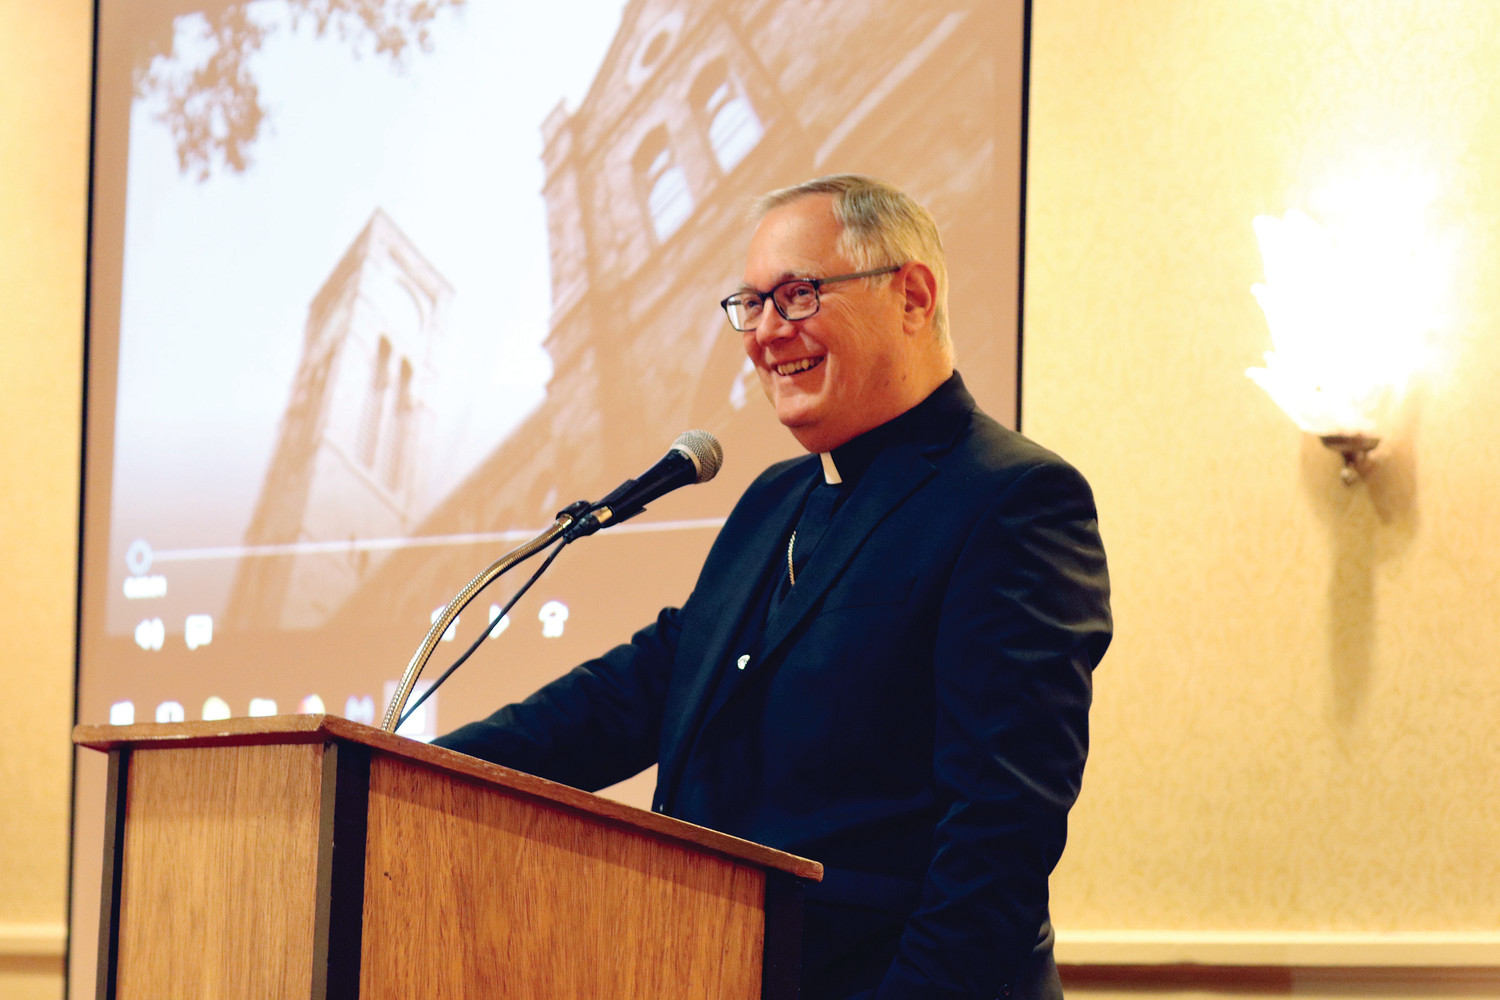 Bishop Thomas J. Tobin answers questions during a convocation for diocesan deacons on February 3 at the Radisson Airport Hotel in Warwick. The bishop offered prayers with the deacons and shared his gratitude for their continued service to the Catholic Church.